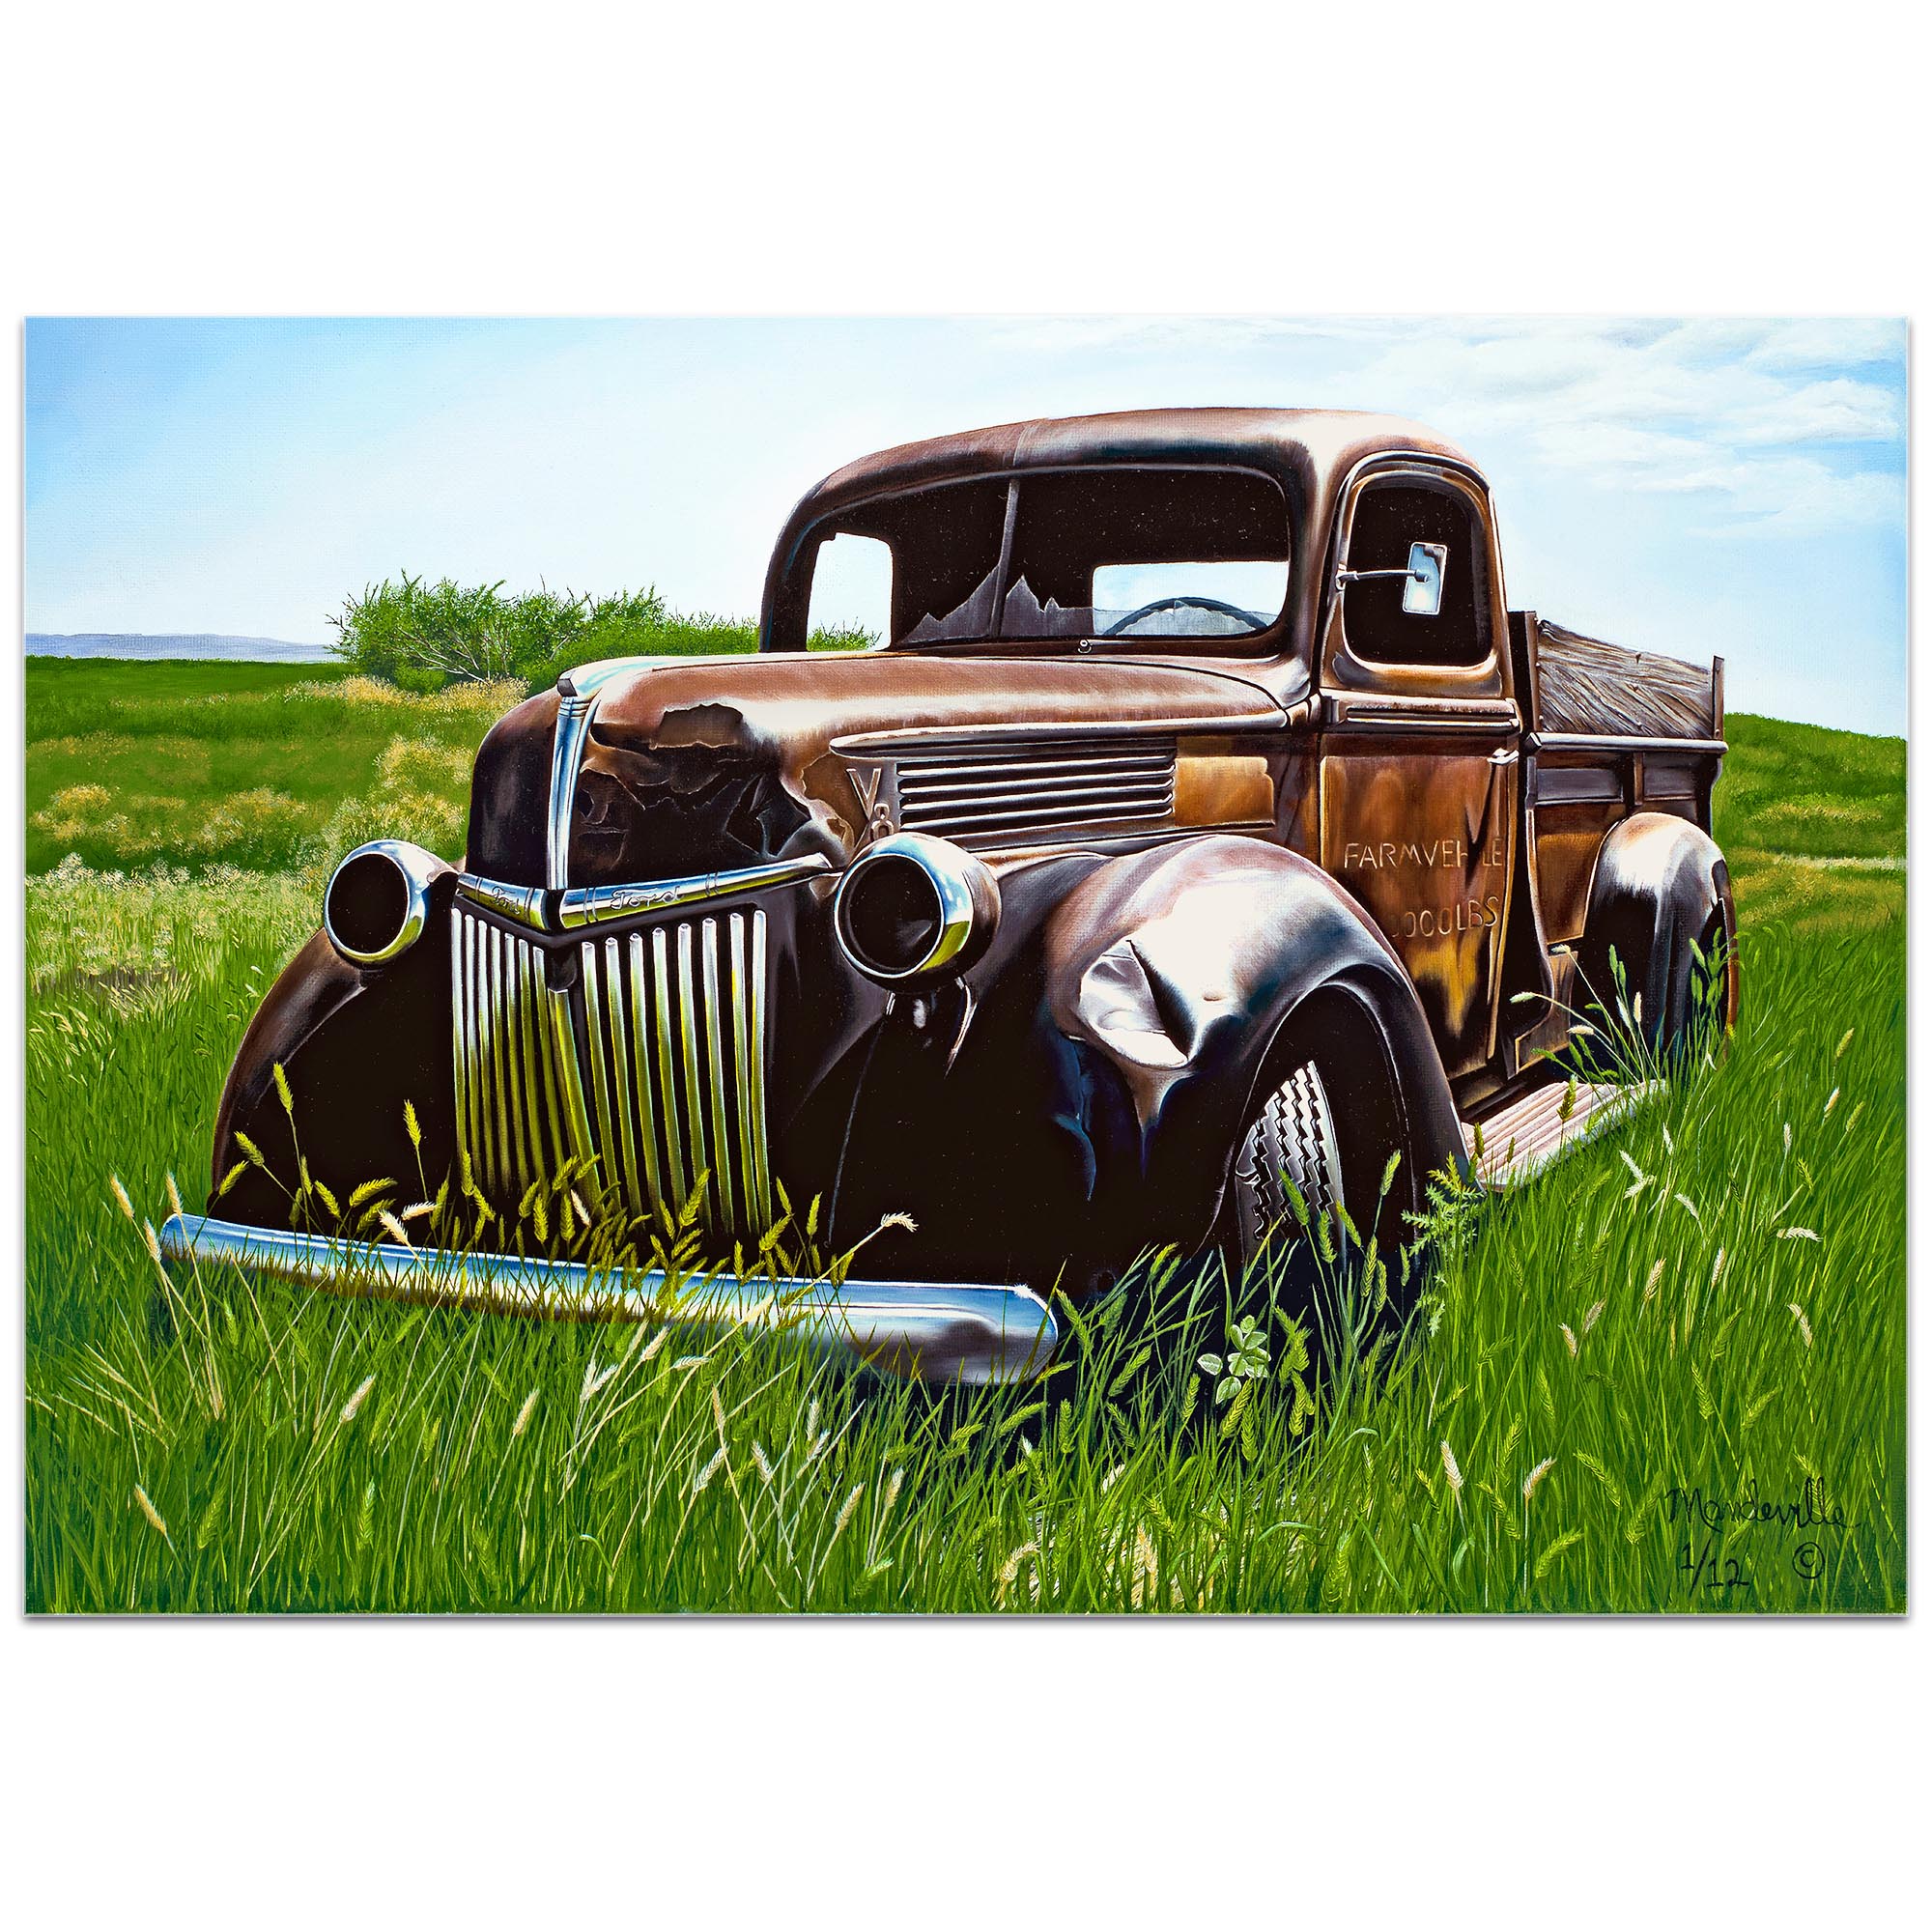 Americana Wall Art 'Out to Pasture' - Classic Trucks Decor on Metal or Plexiglass - Image 2